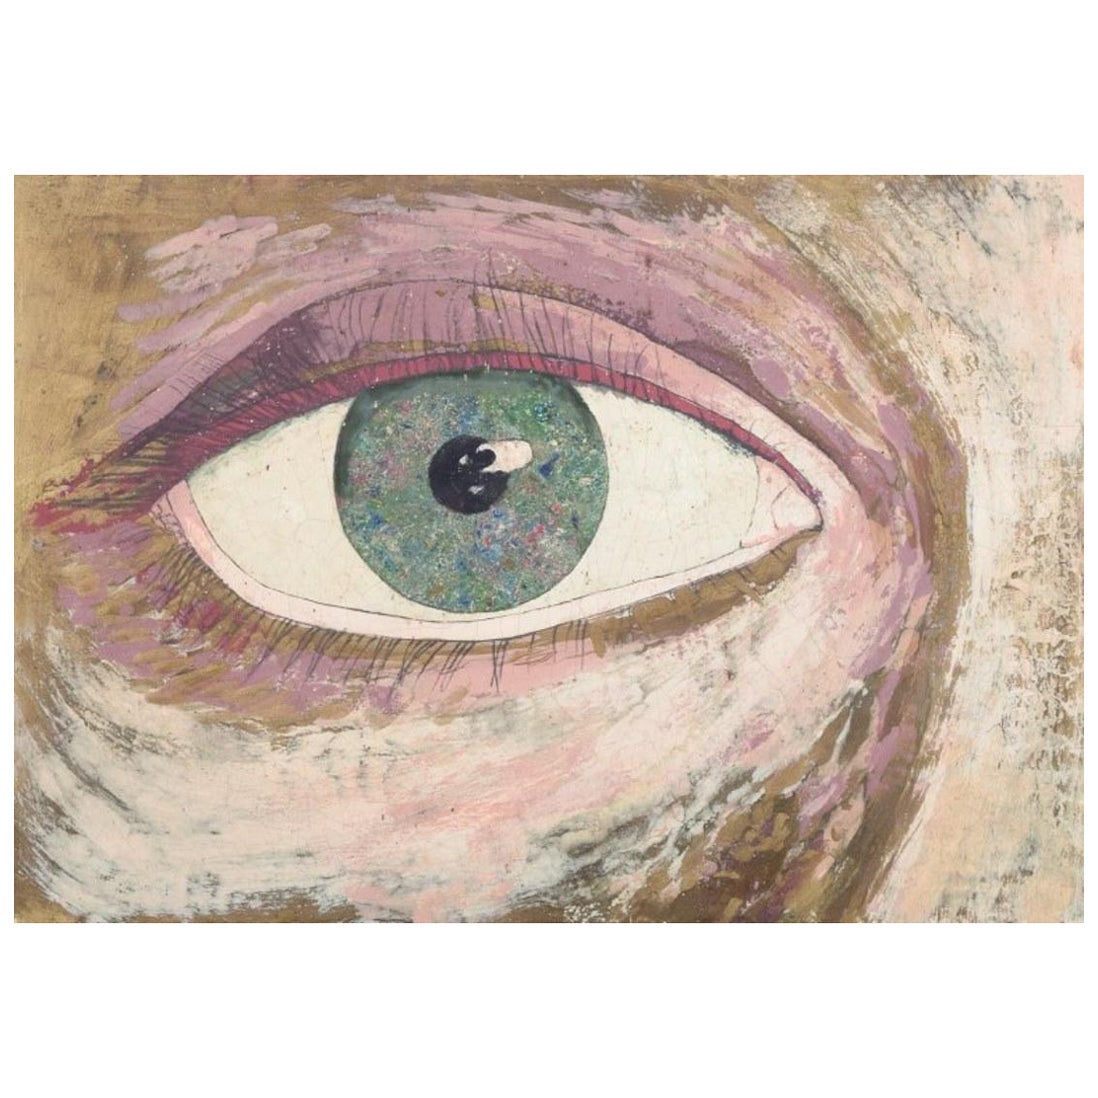 Ingvar Engdahl, Swedish artist. Mixed media on board. Close-up view of an eye. For Sale